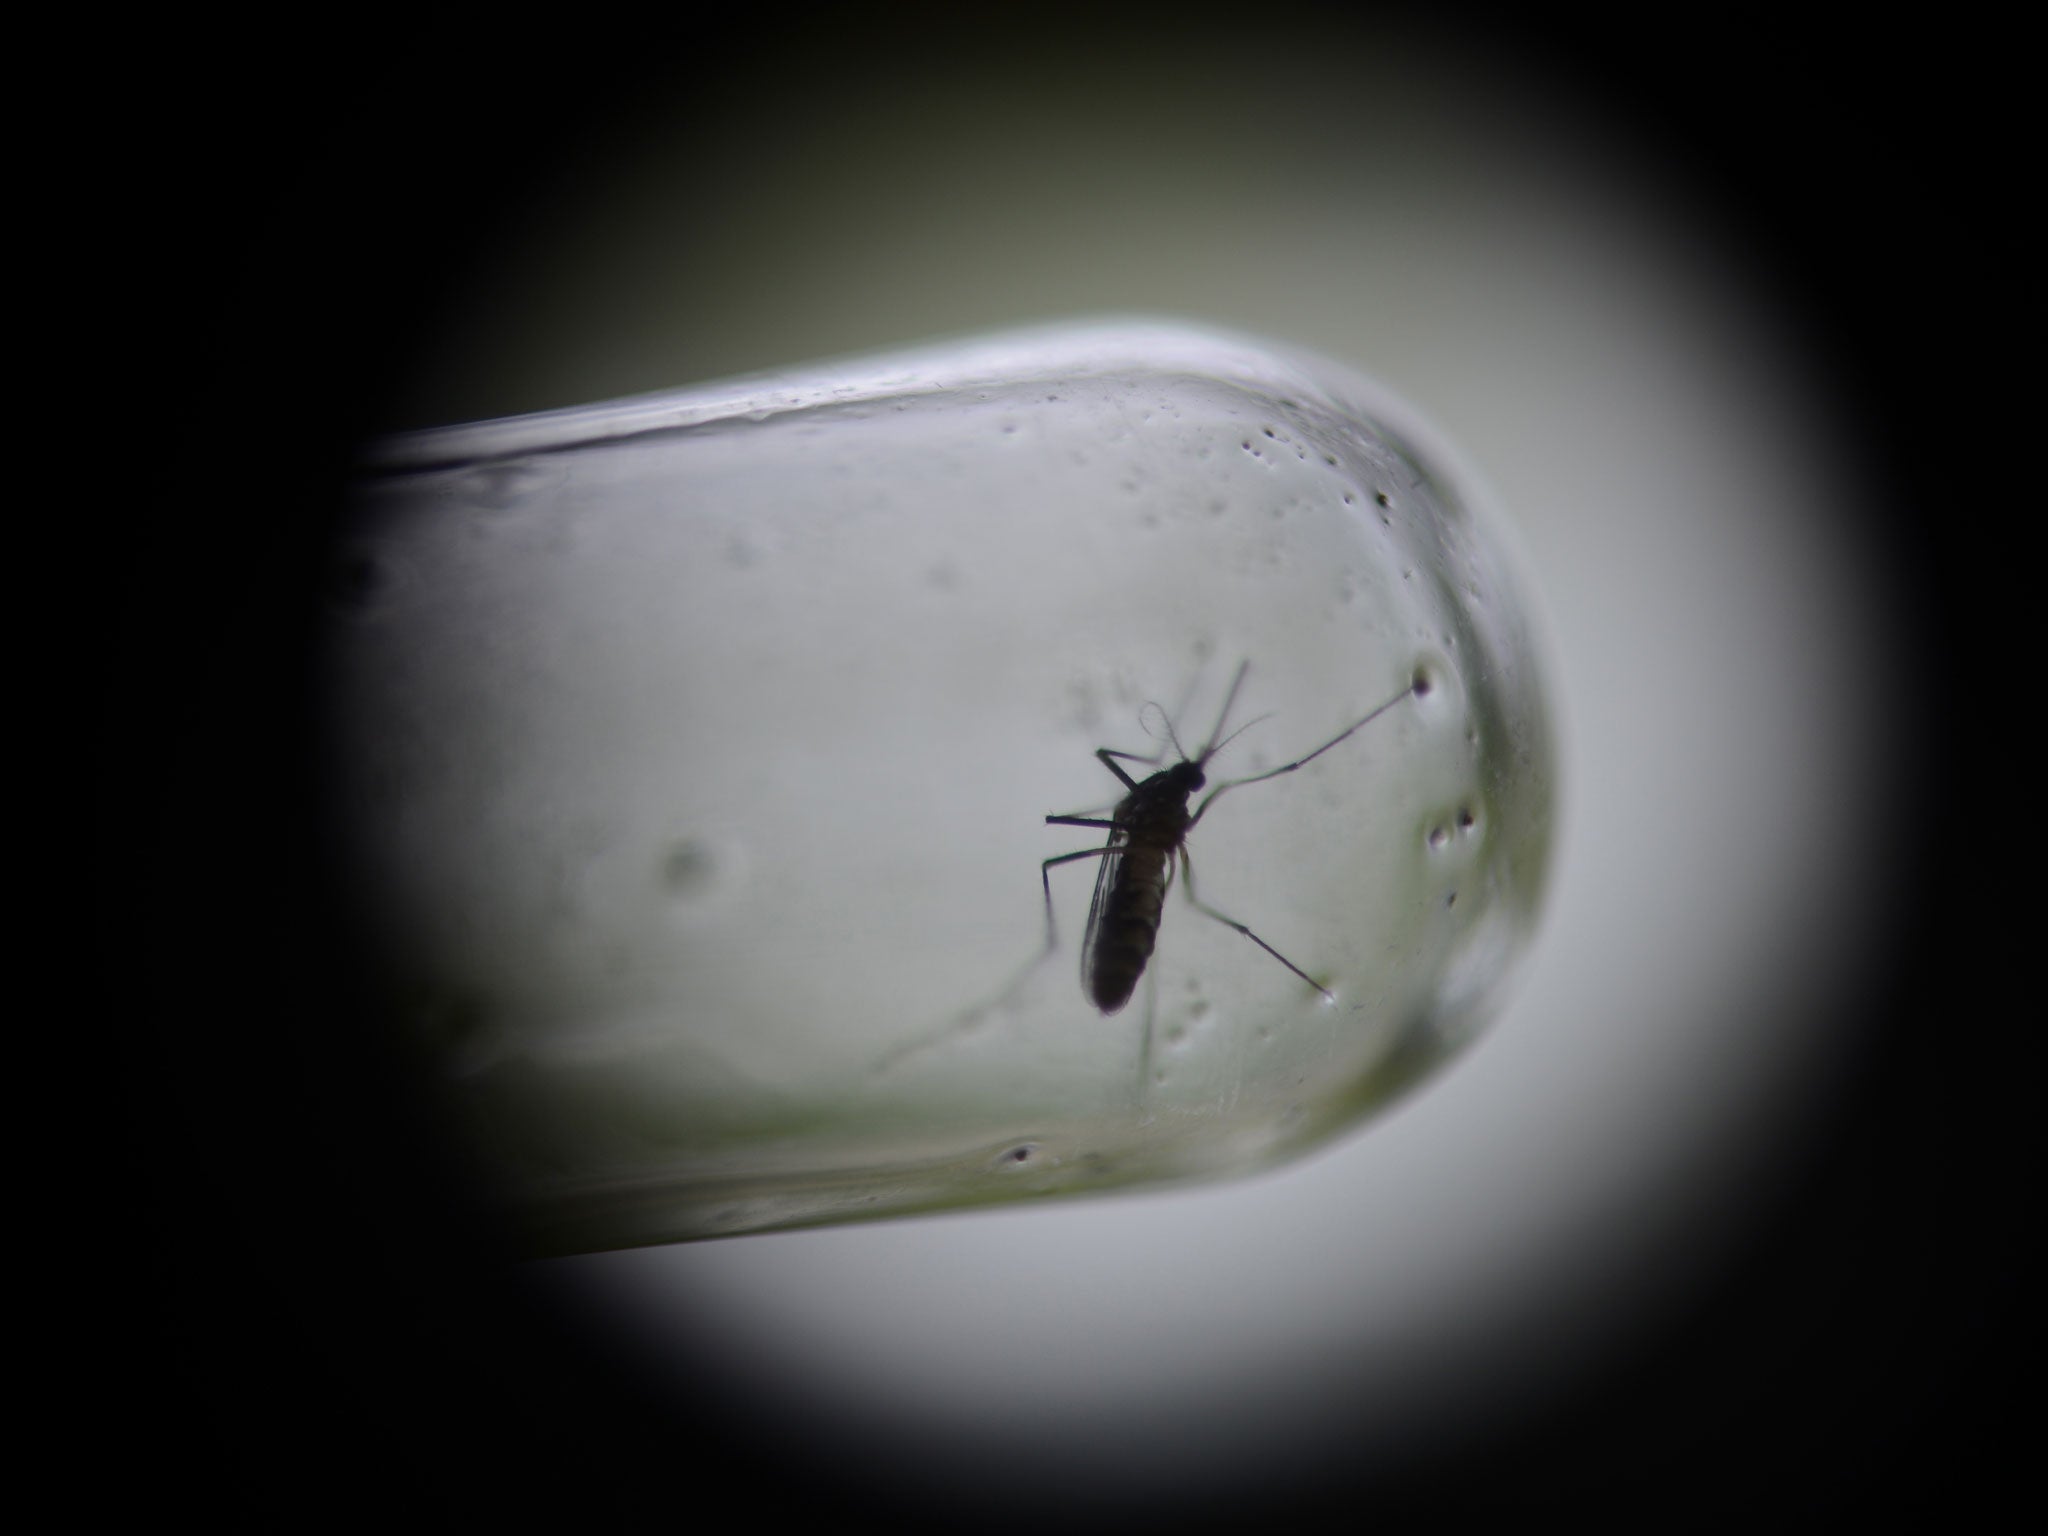 Last year Brazil reported 1.4 million cases of dengue fever, which is carried by the Aedes aegypti mosquito 